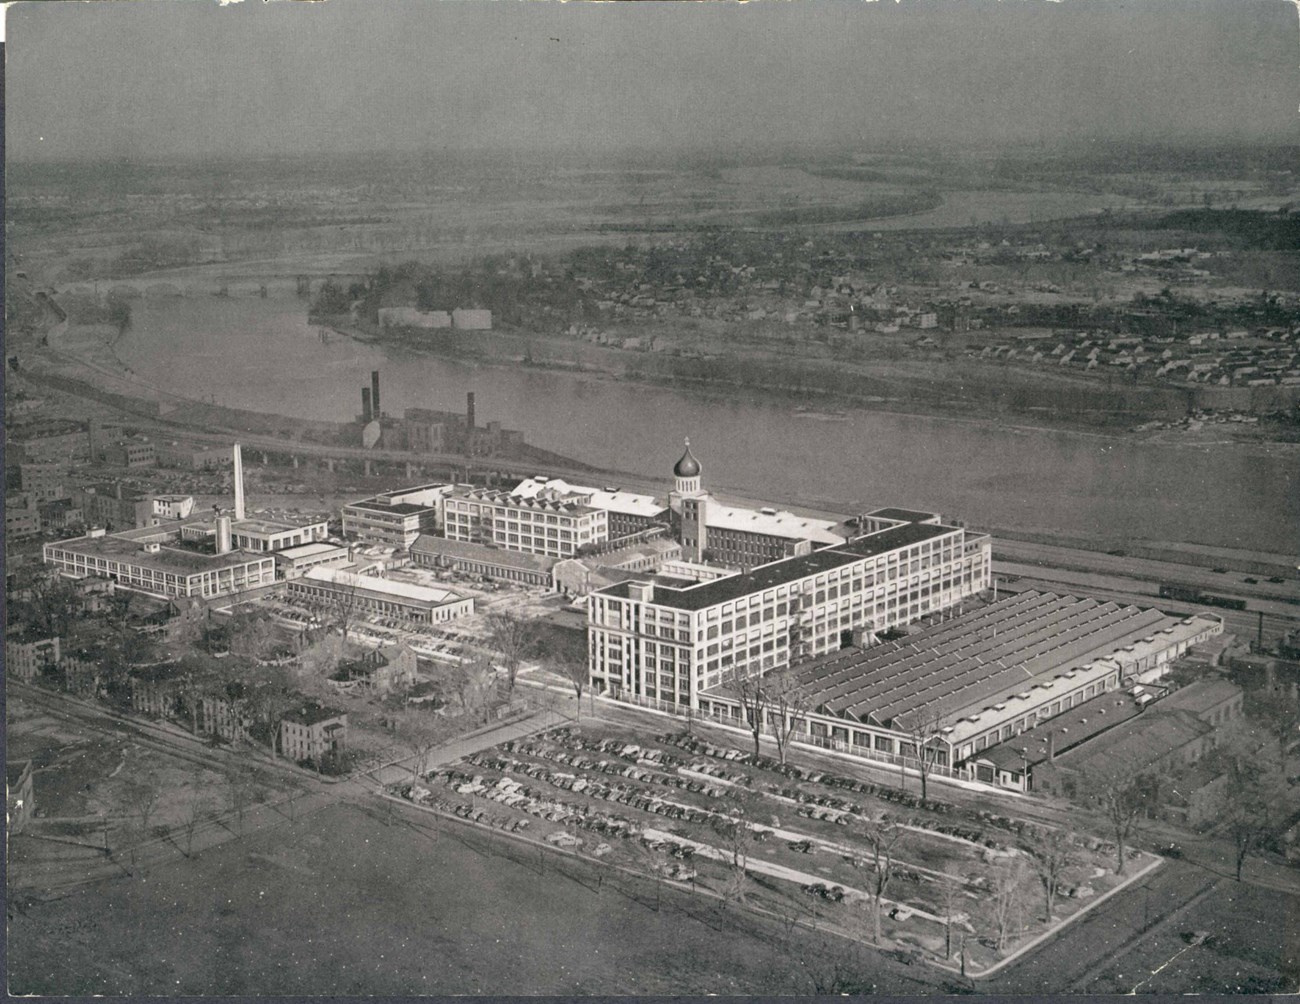 An aerial photo of a factory along a river with houses on the other side of the river.